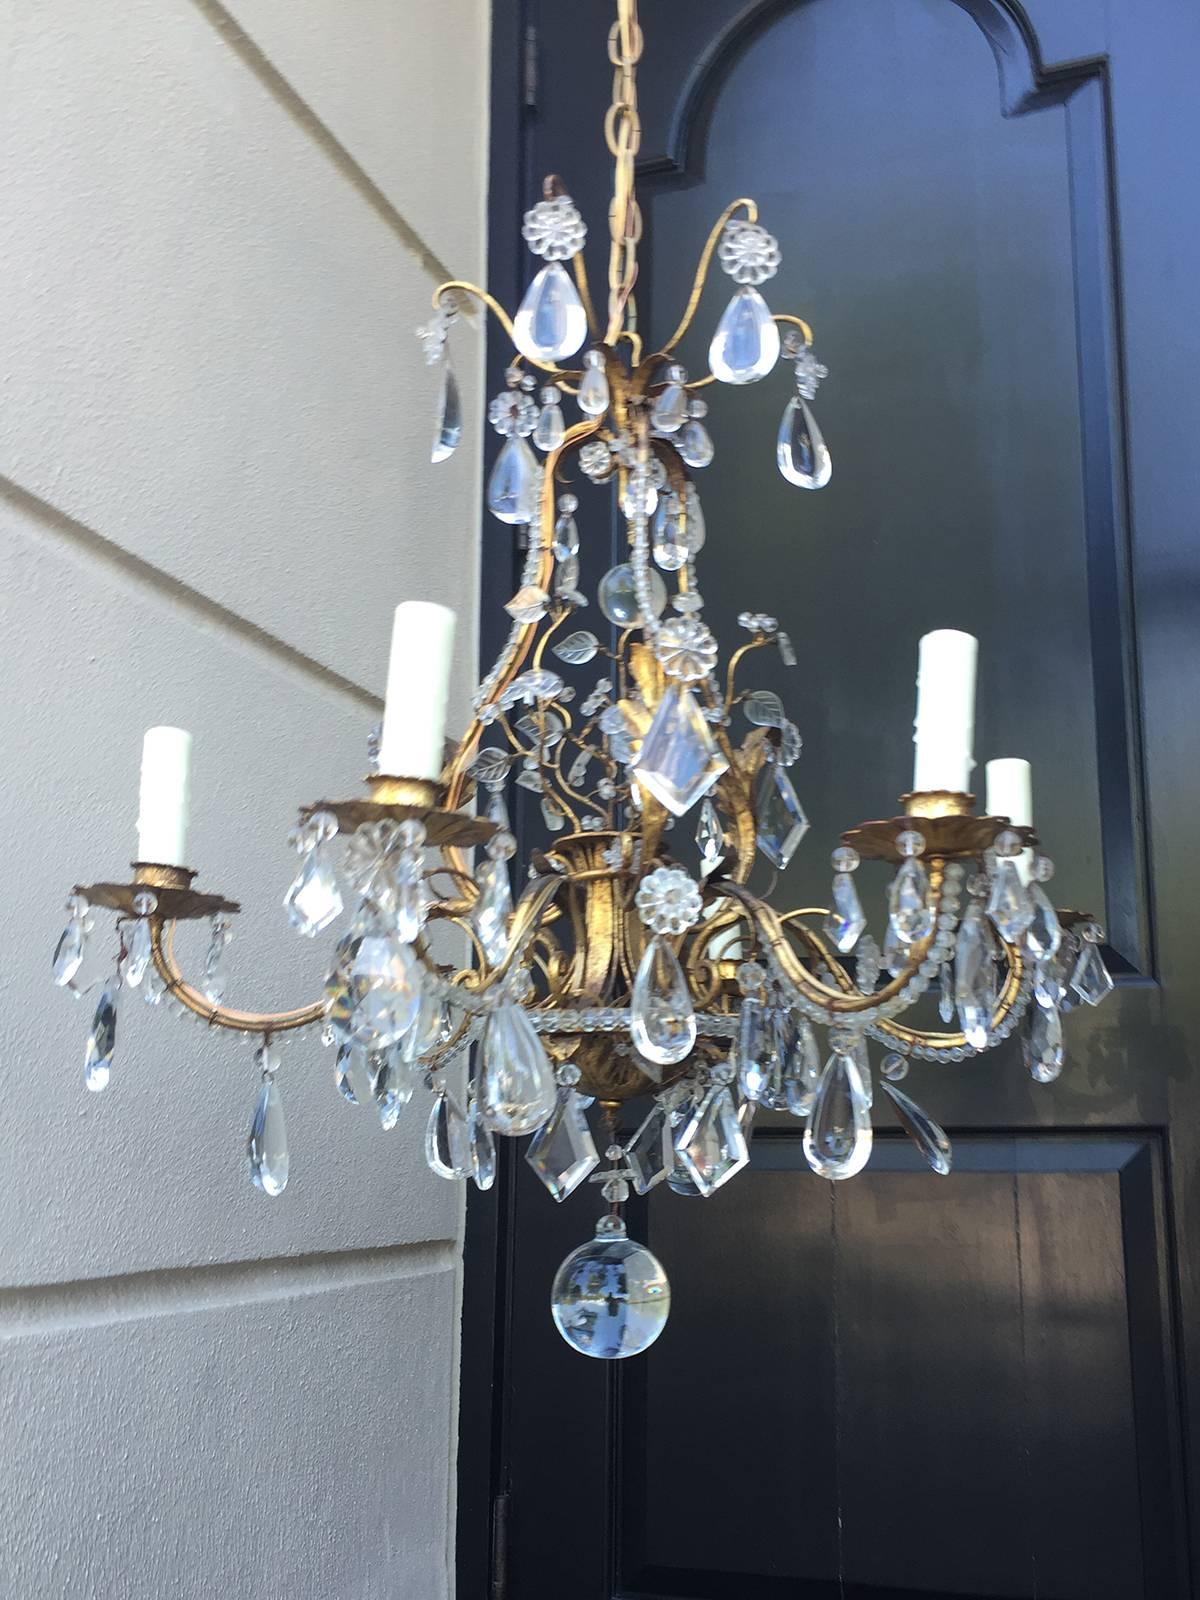 Early 20th century Italian crystal and gilt metal chandelier.